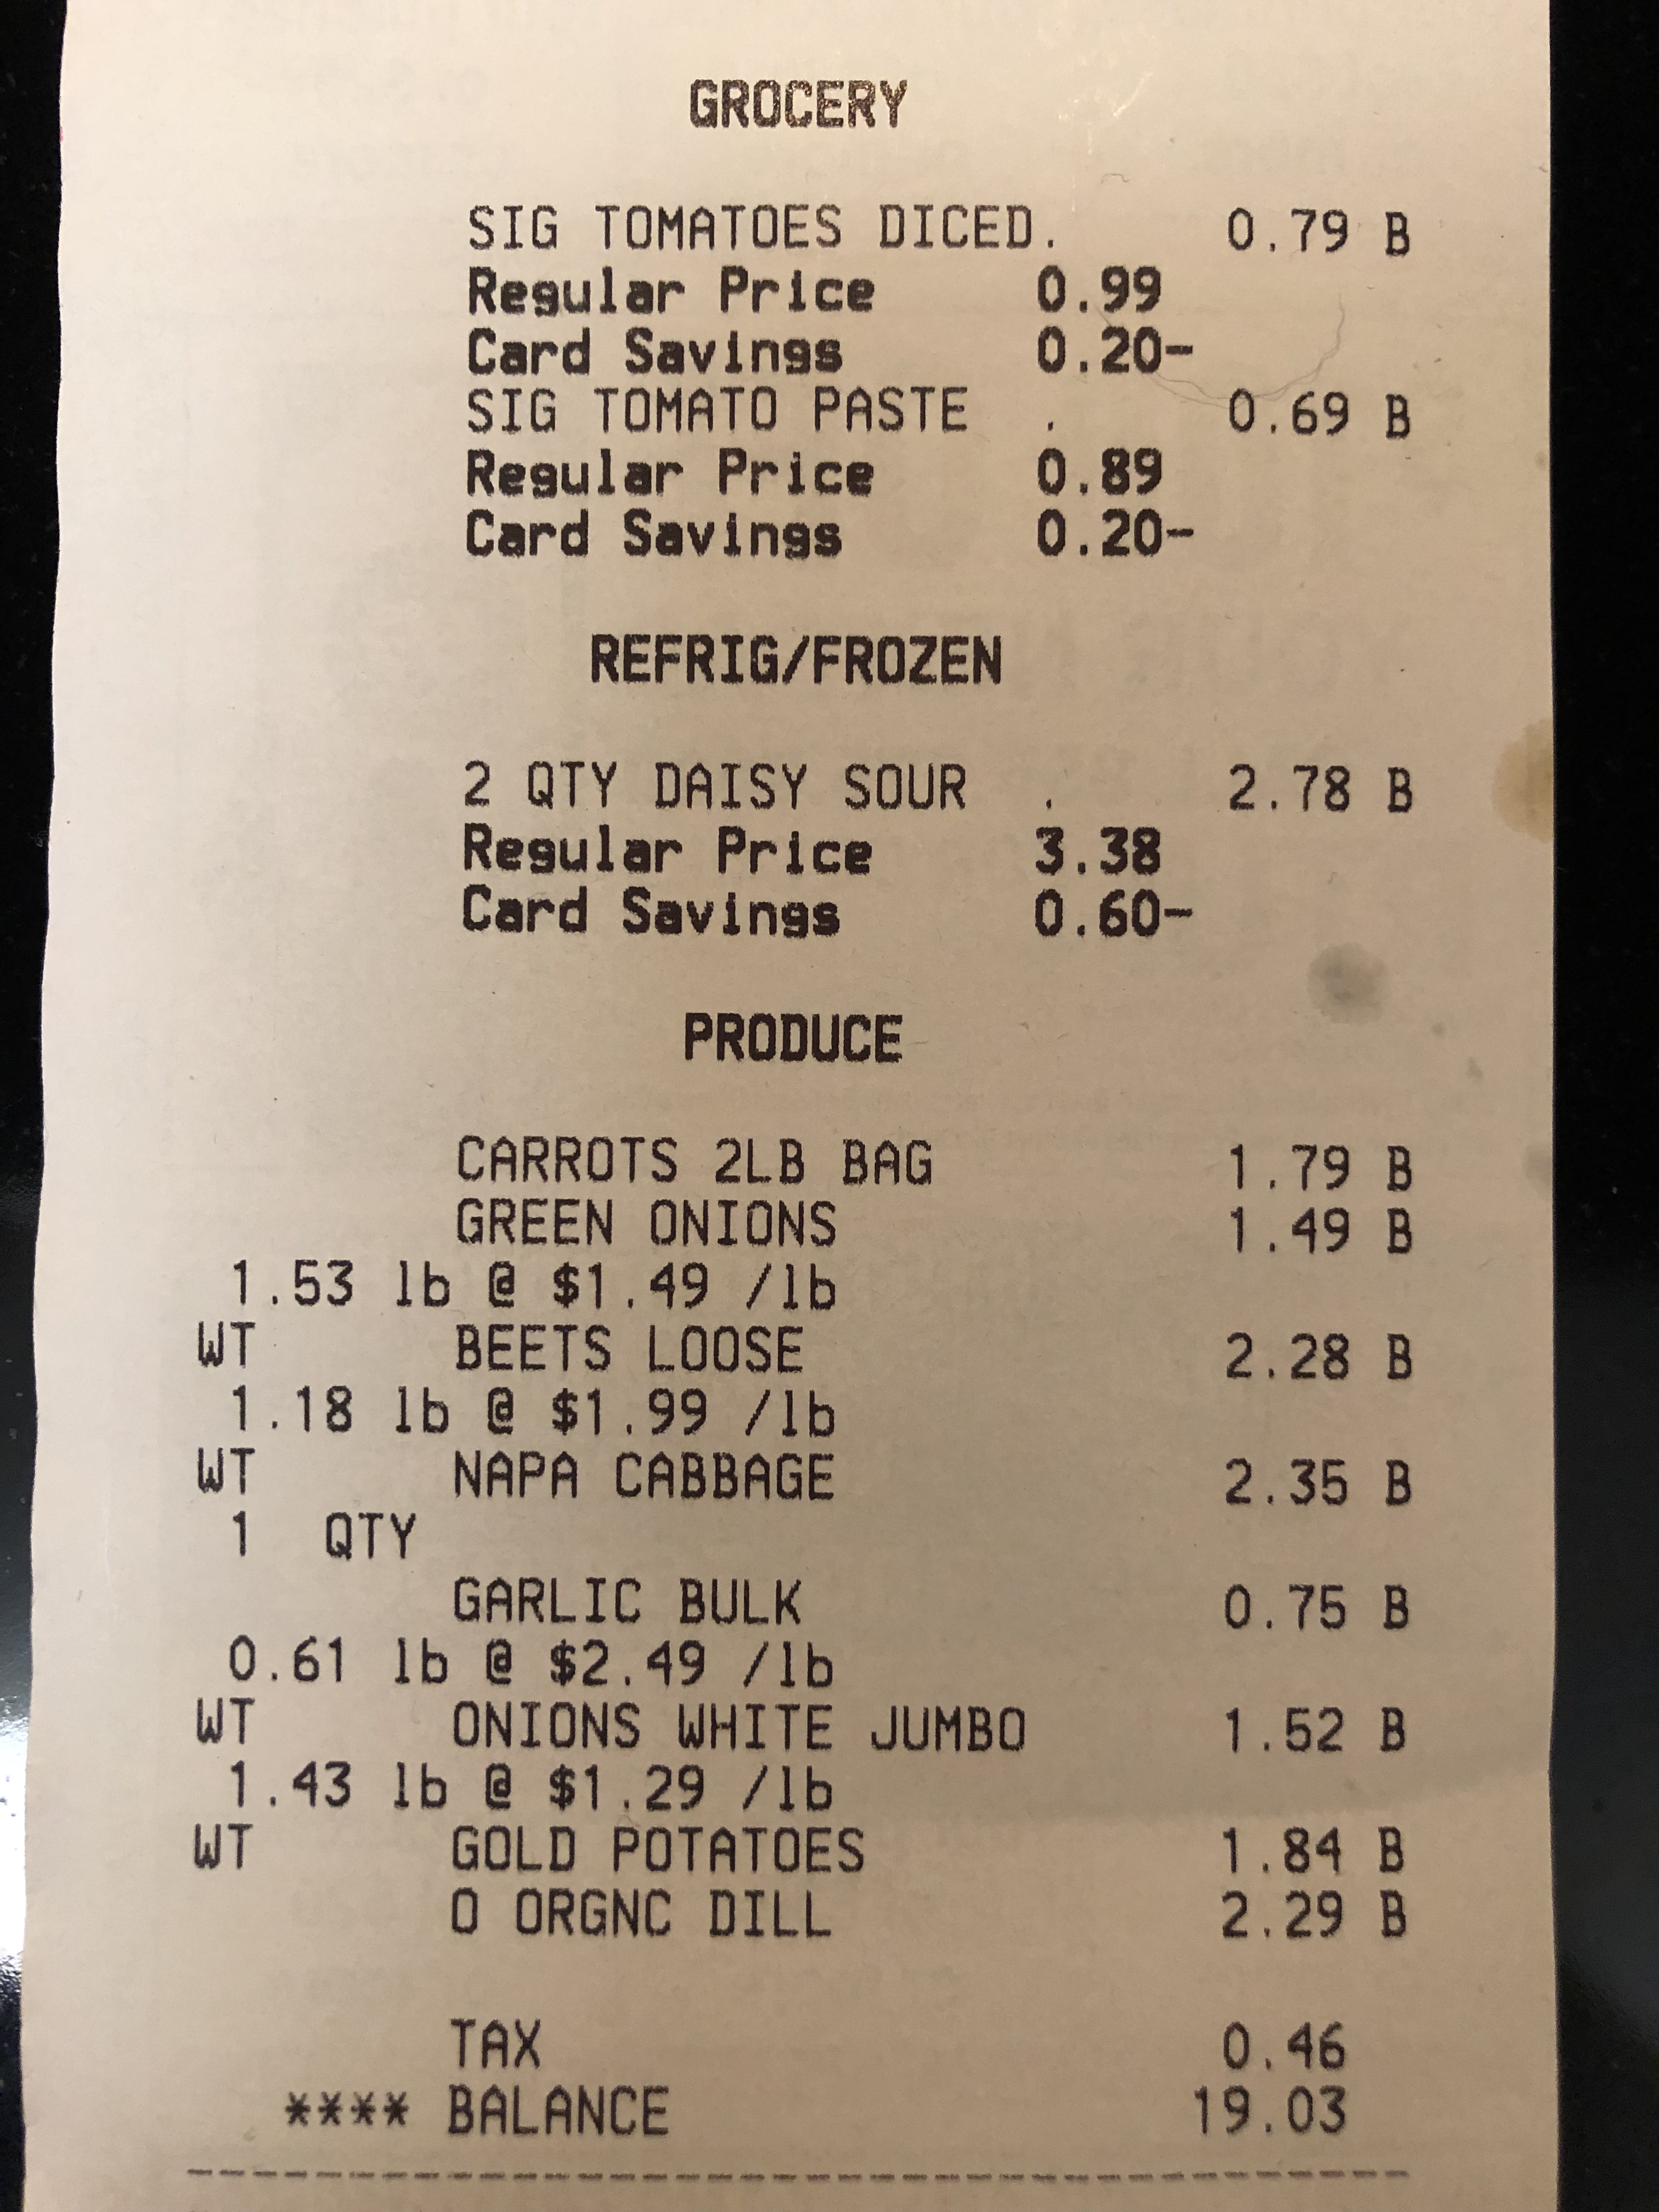 Receipt showing itemized list of ingredients and their prices